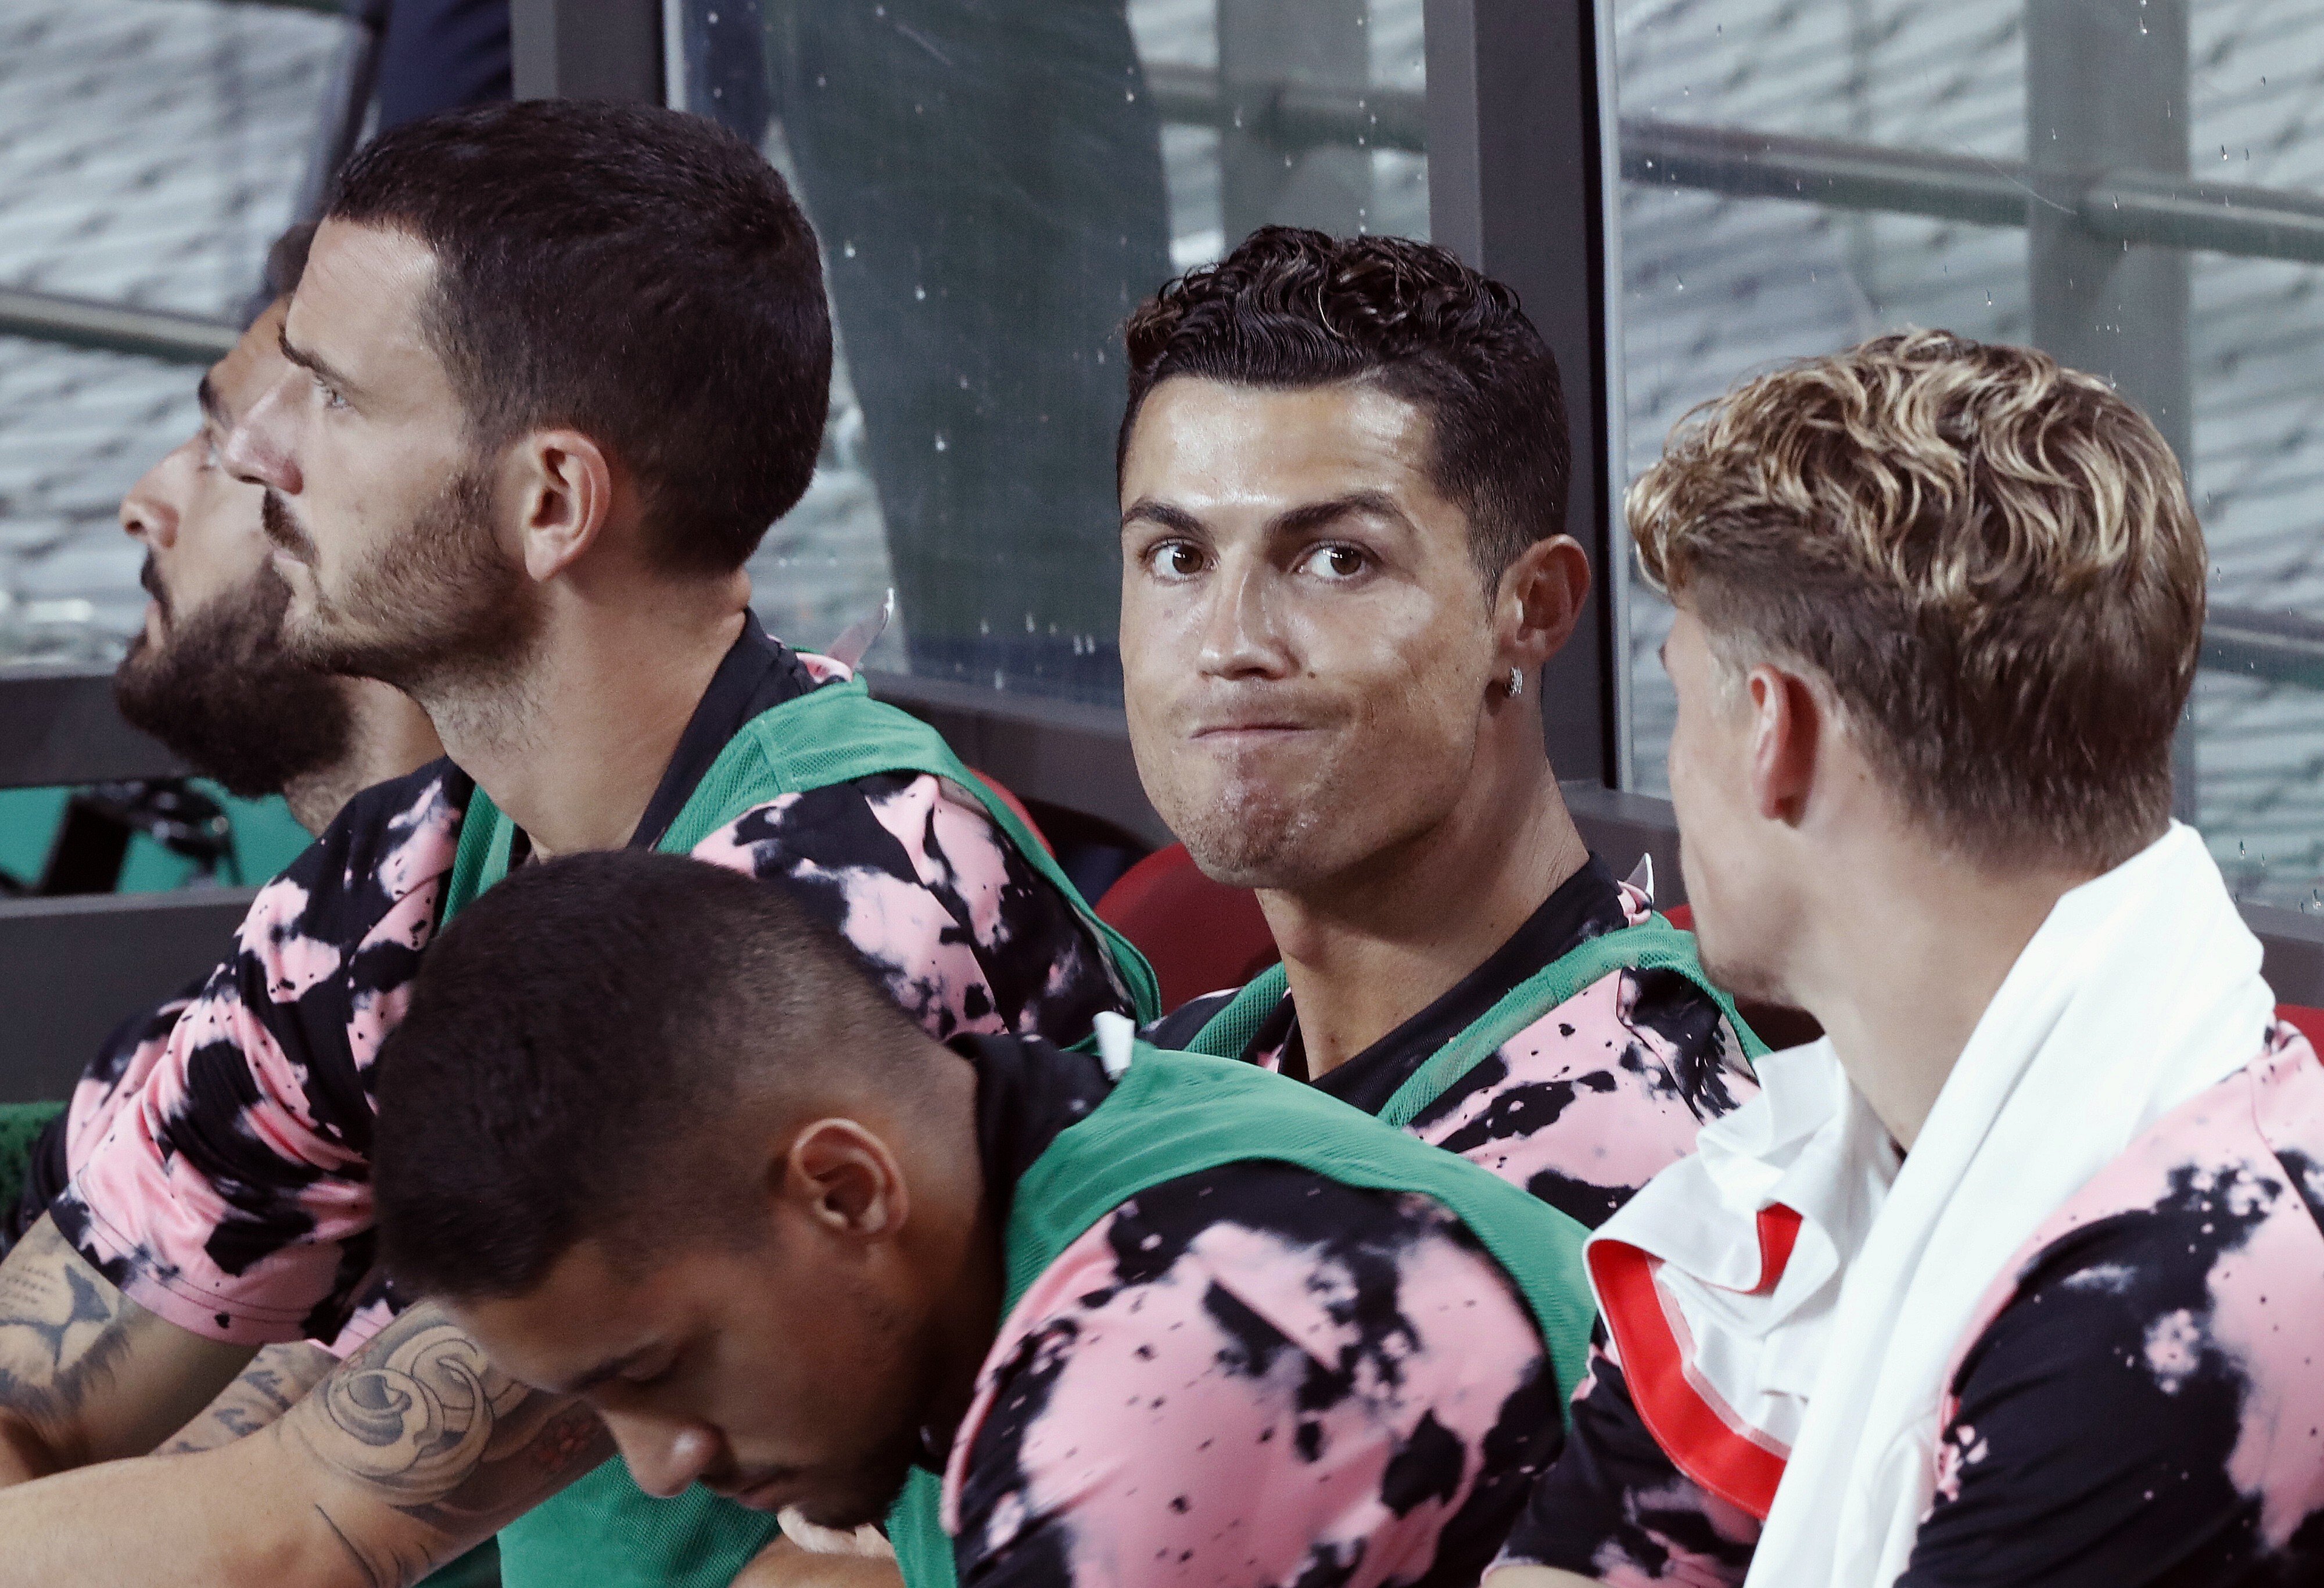 Cristiano Ronaldo of Juventus sits on the bench before a friendly match against the K-League All-Stars at the Seoul World Cup Stadium in Seoul, South Korea, on July 26, 2019. Photo: AP